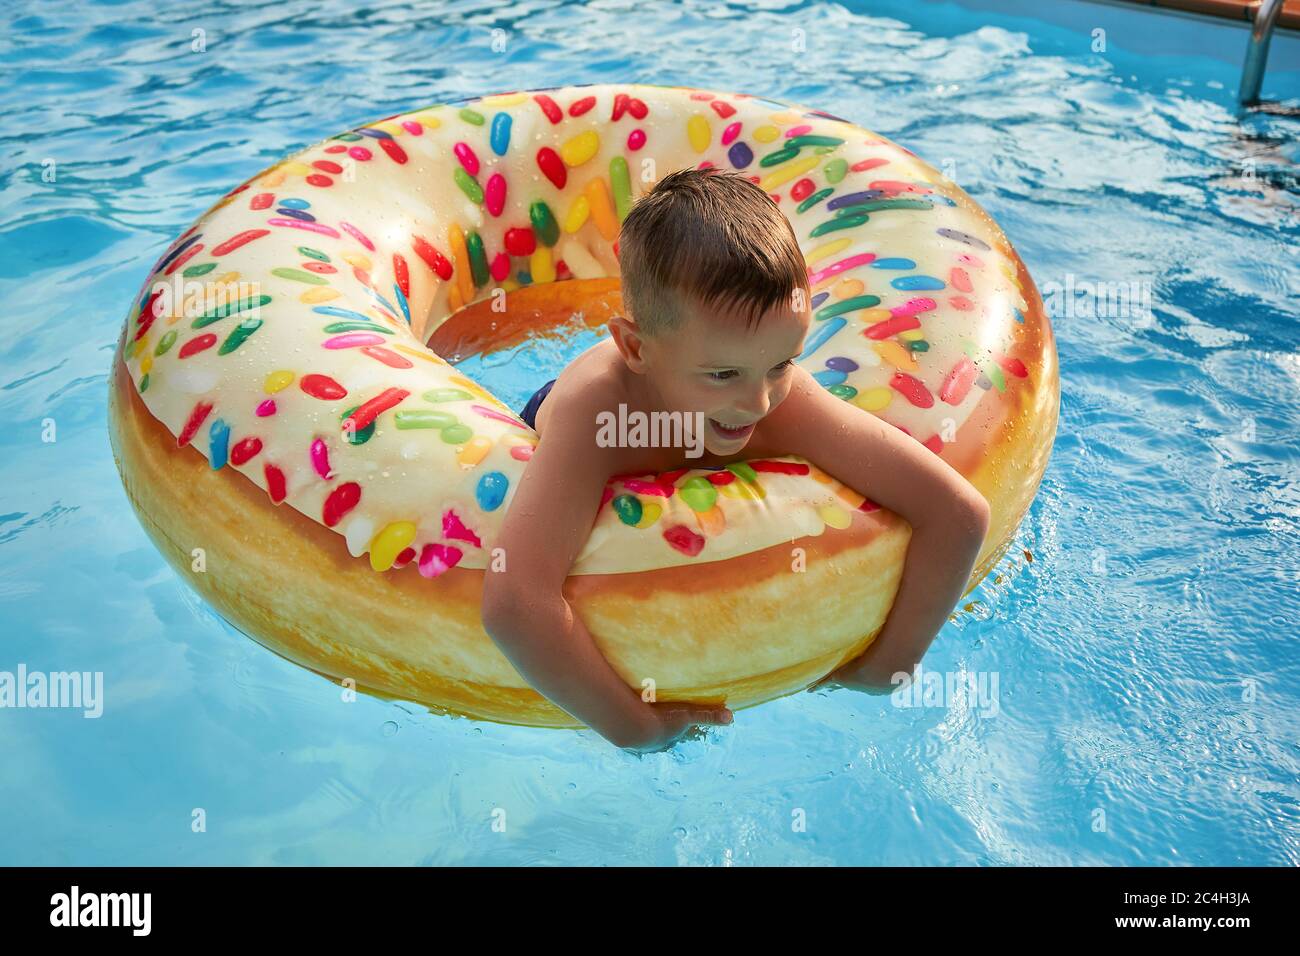 5 years old Boy in swimming pool on inflatable colorful ring Stock Photo